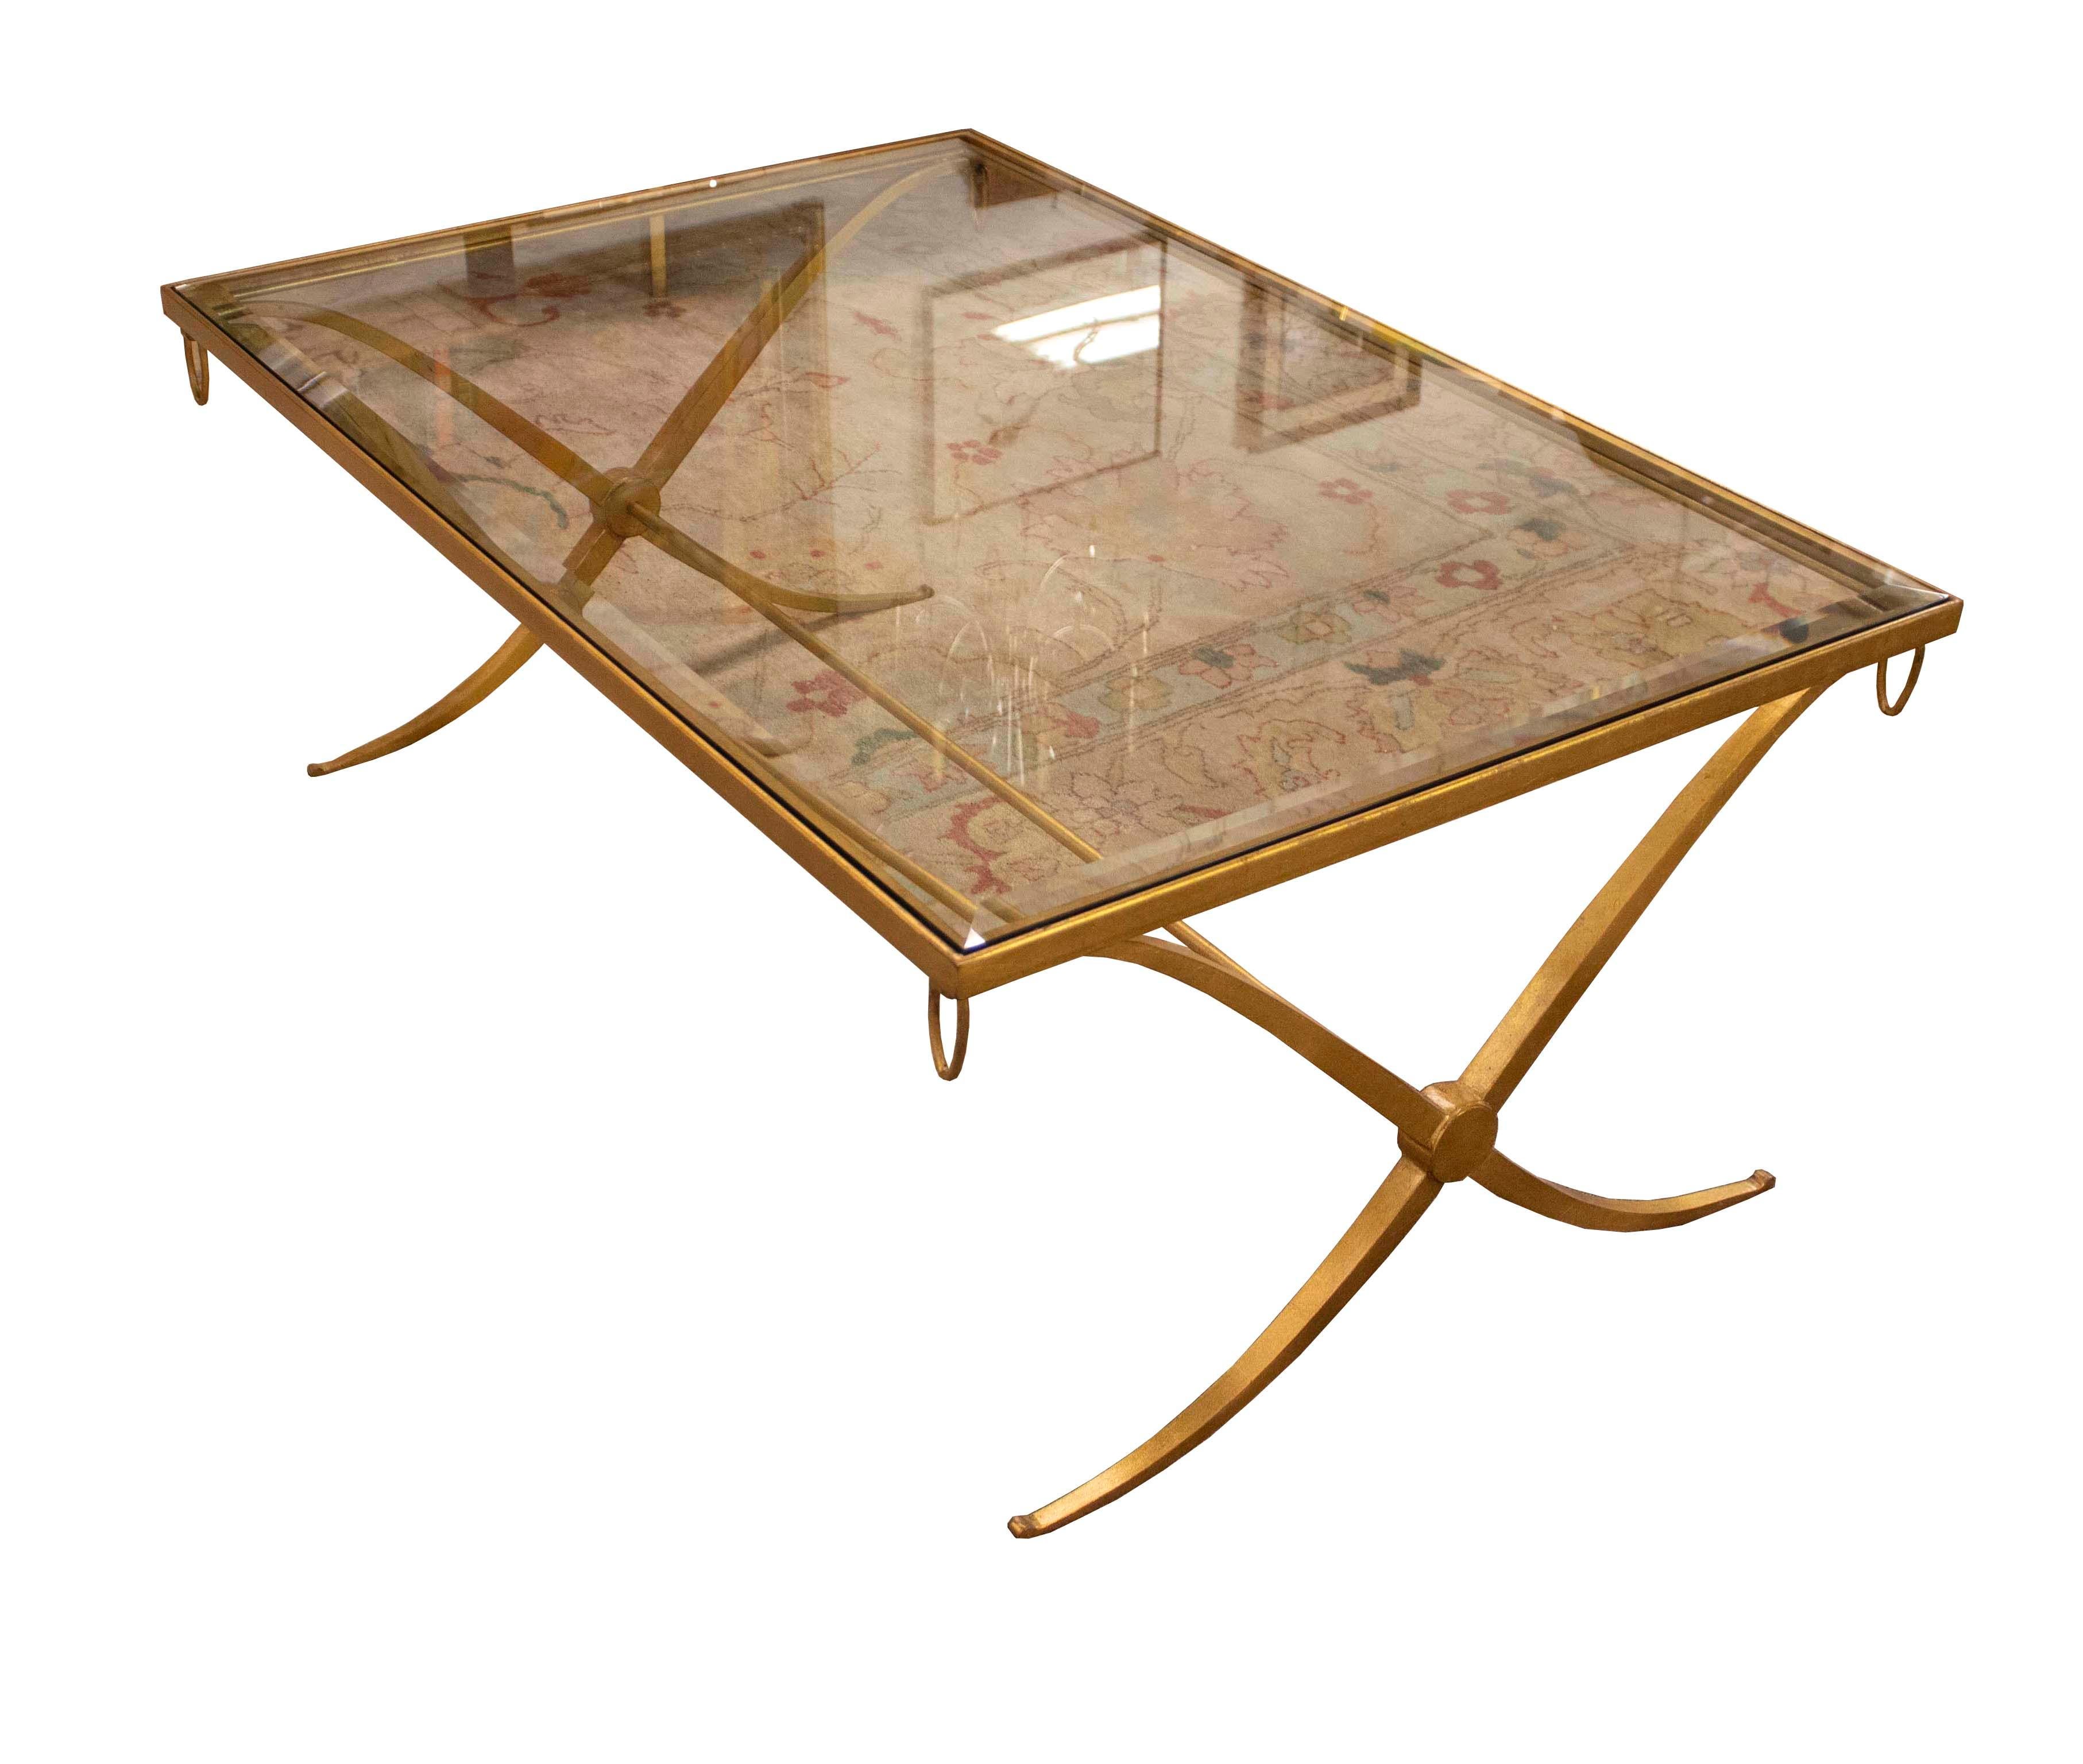 20th Century Baker Gold Leaf & Glass Top Cocktail Table Vintage Inspired